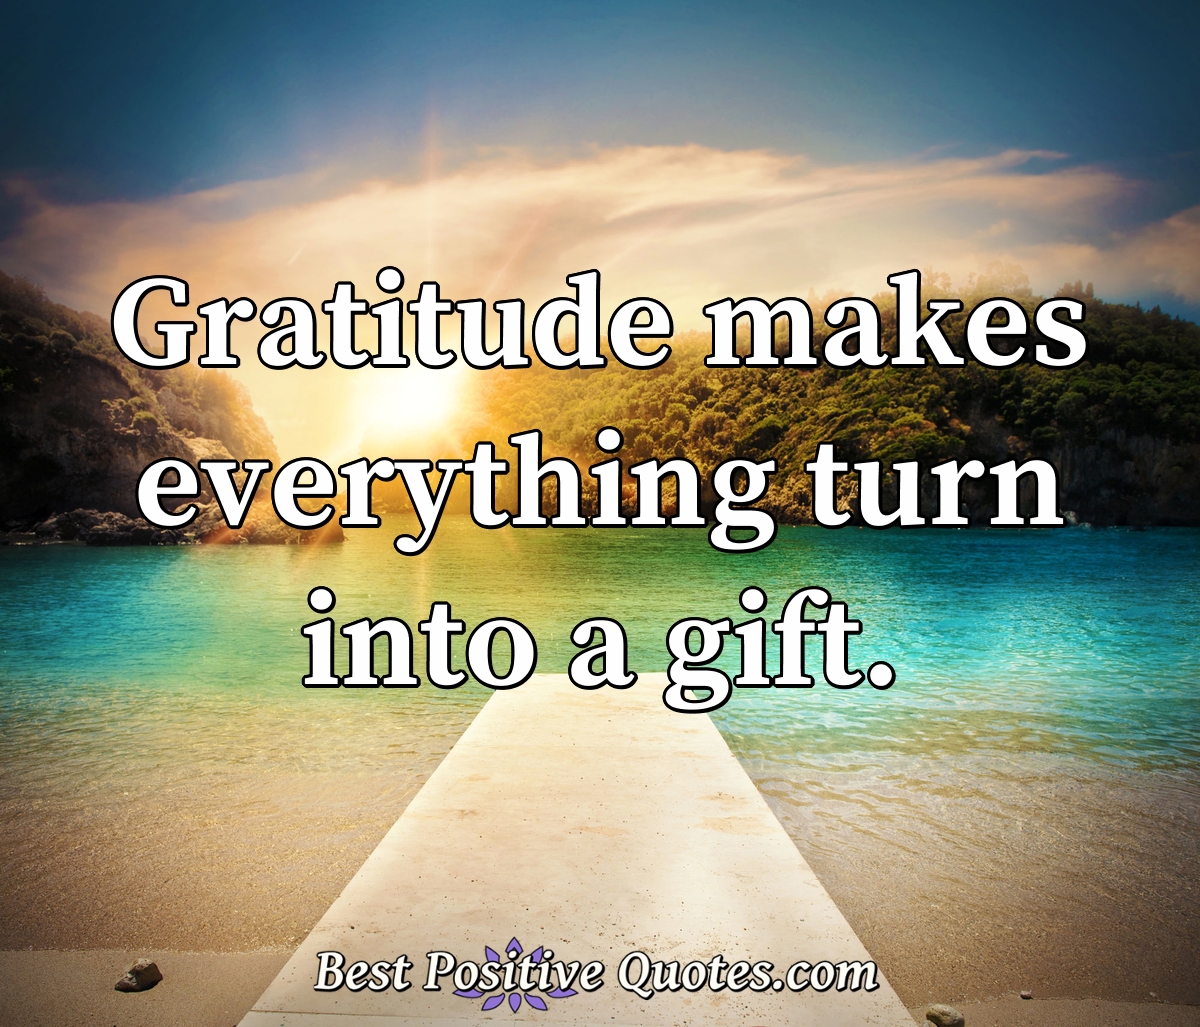 Gratitude makes everything turn into a gift. - Anonymous